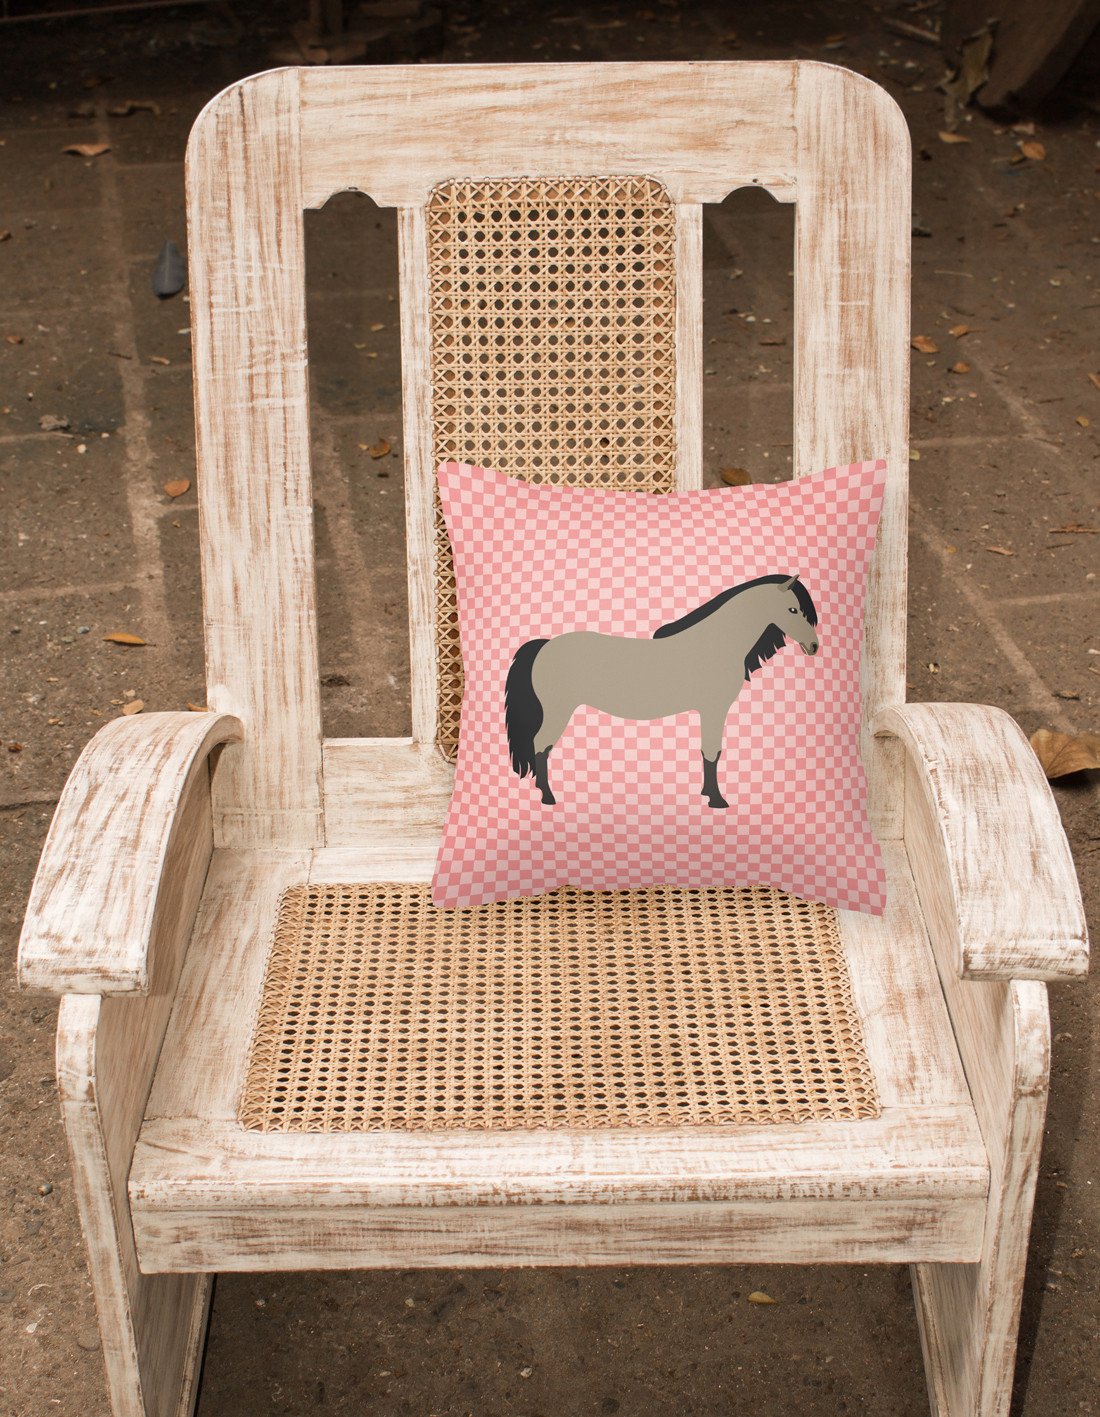 Welsh Pony Horse Pink Check Fabric Decorative Pillow BB7910PW1818 by Caroline's Treasures